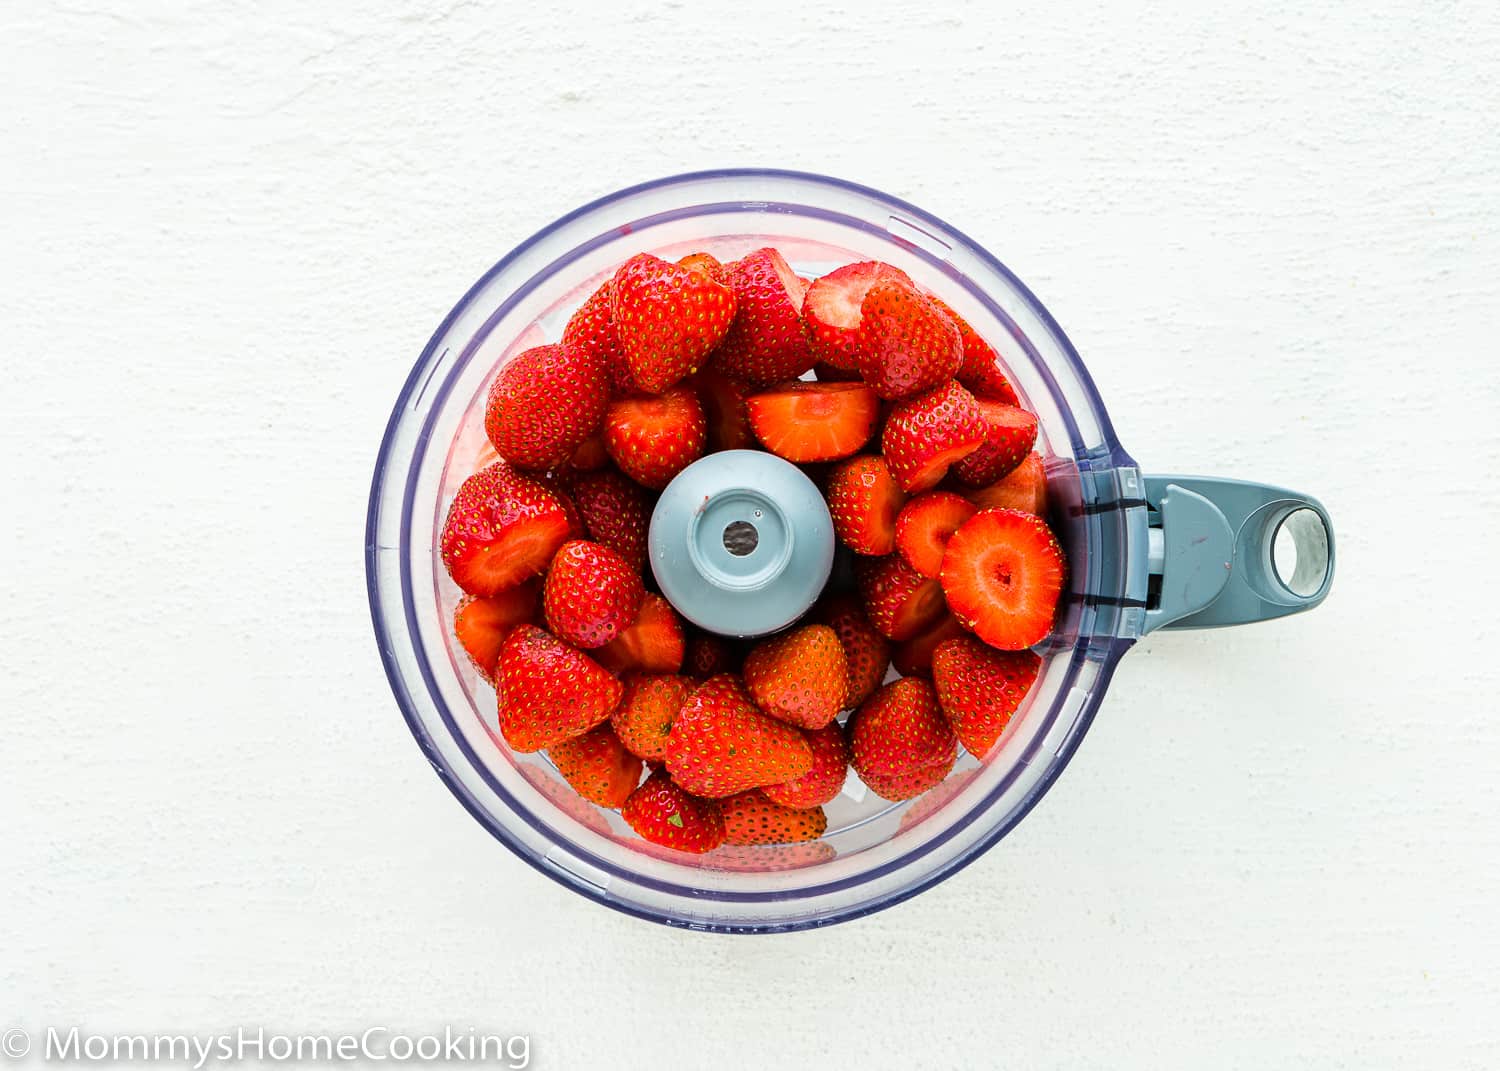 strawberries in a food processor.